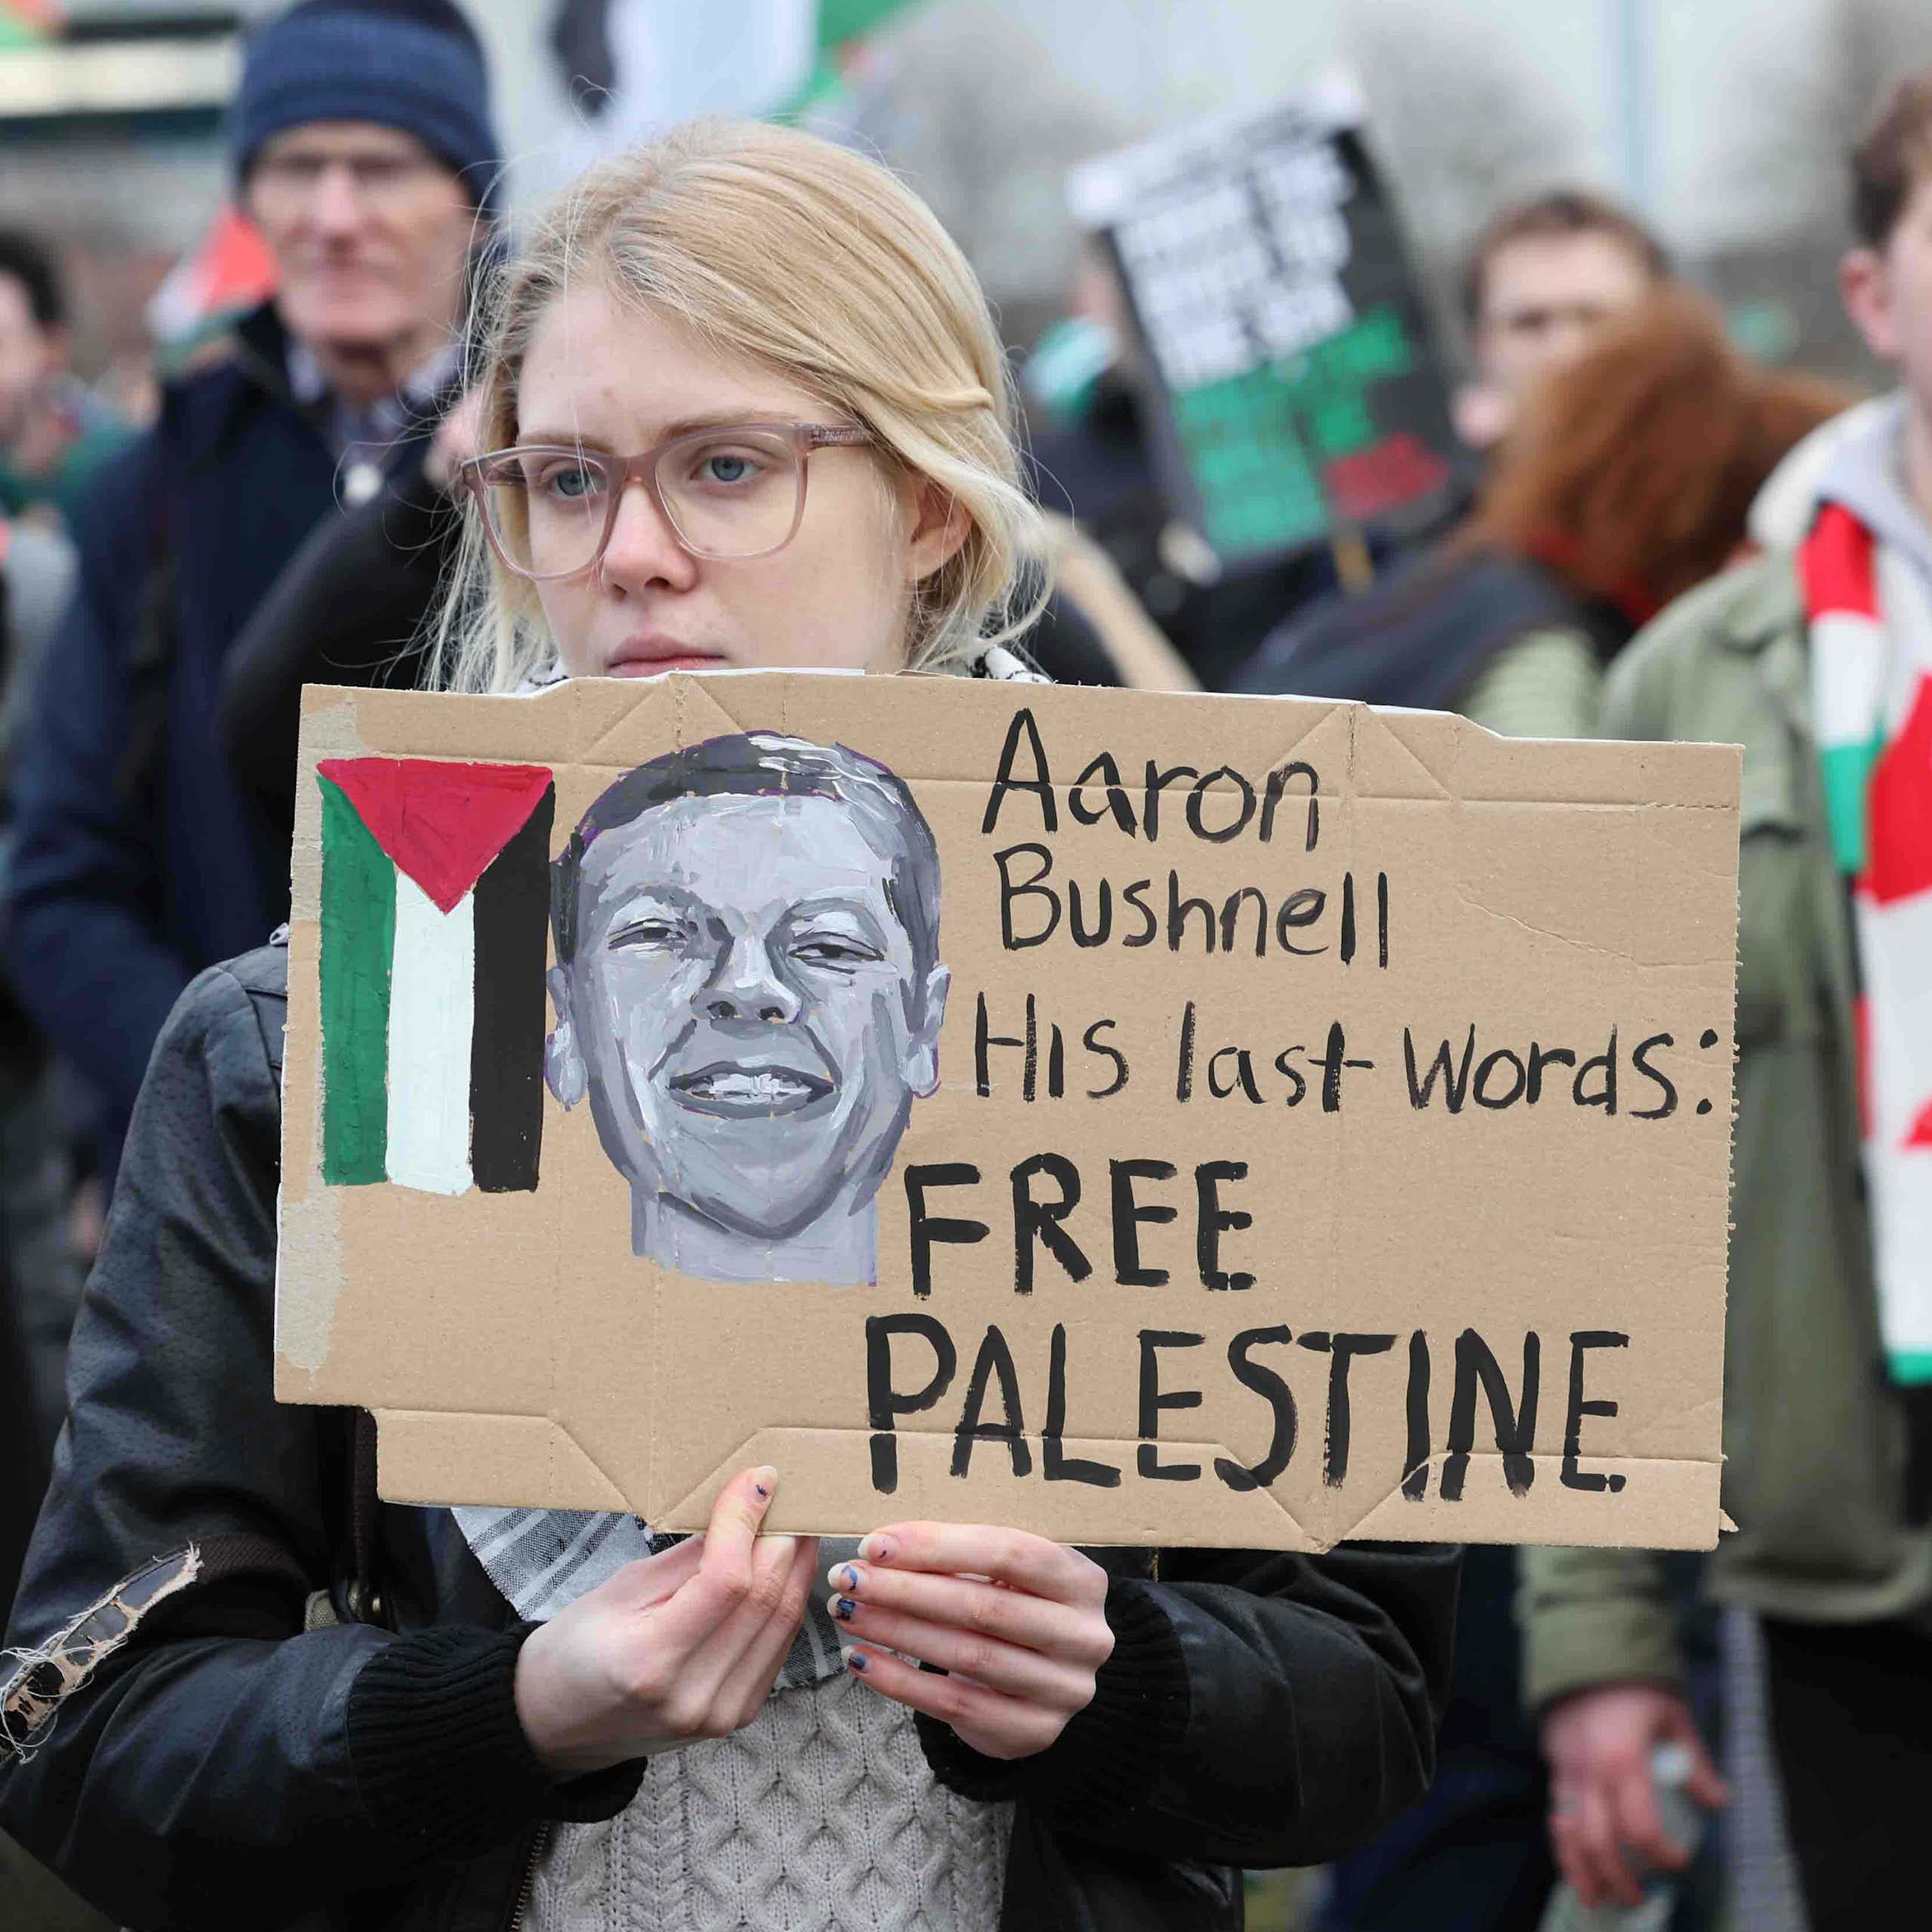 A protestor holding a placard reading "Aaron Bushnell, His last words: Free Palestine"